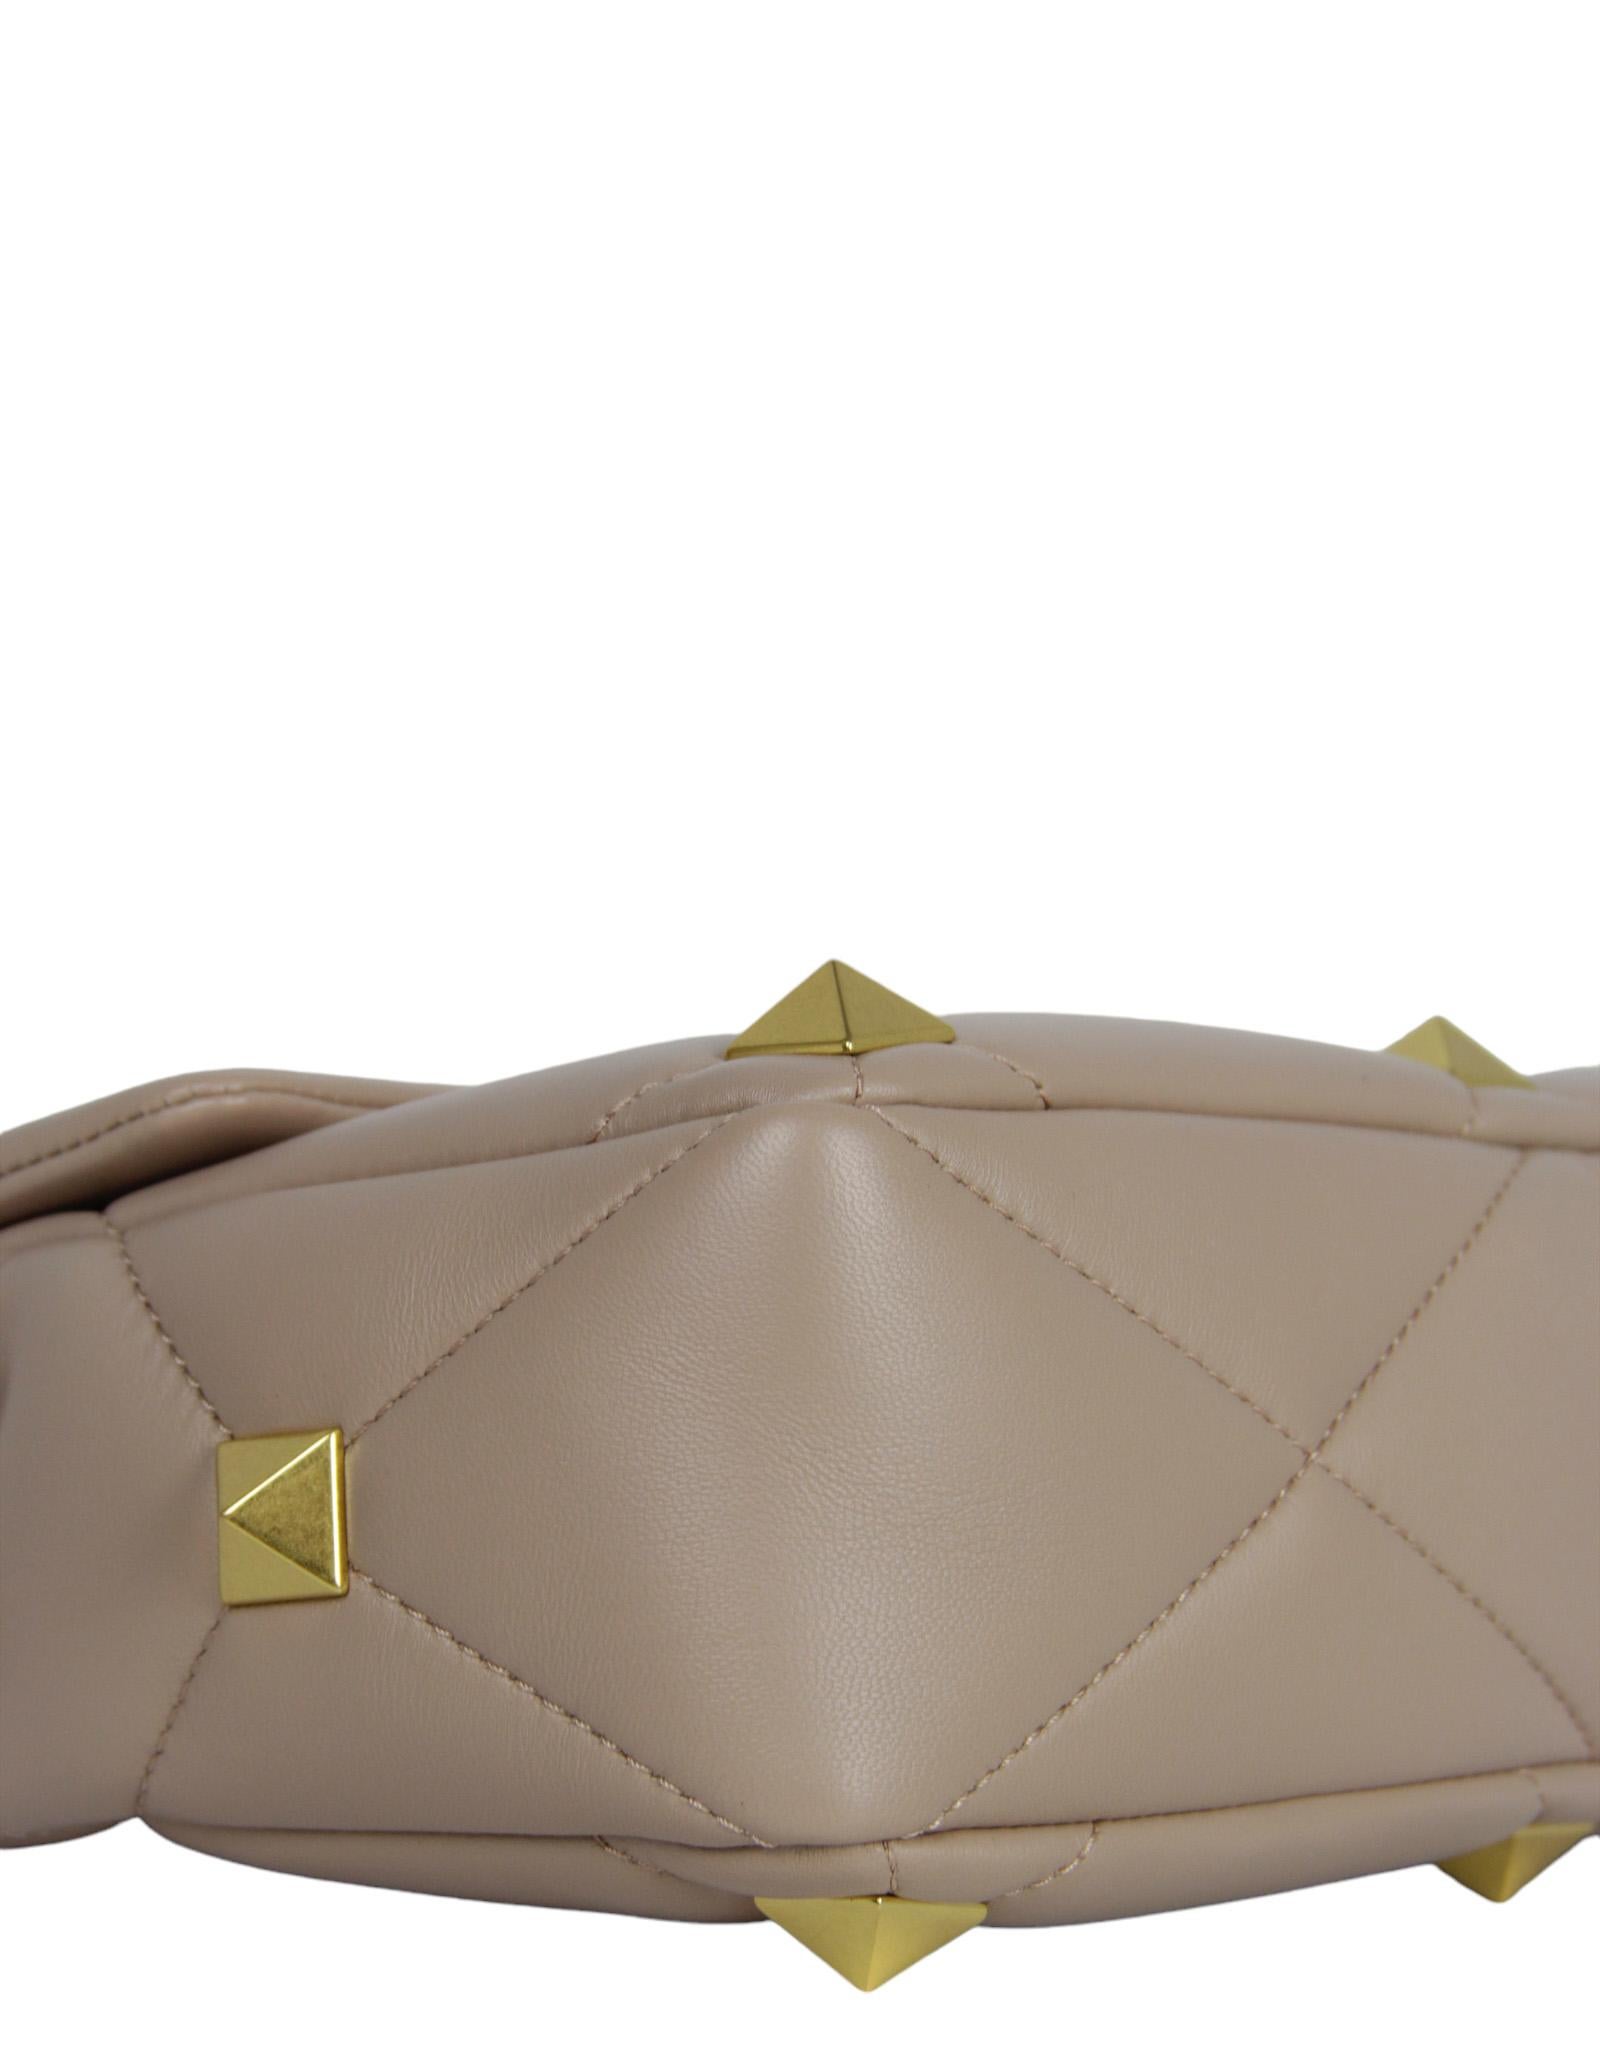 Valentino Rose Cannelle Beige Large Roman Studded Flap Bag rt $3650 1